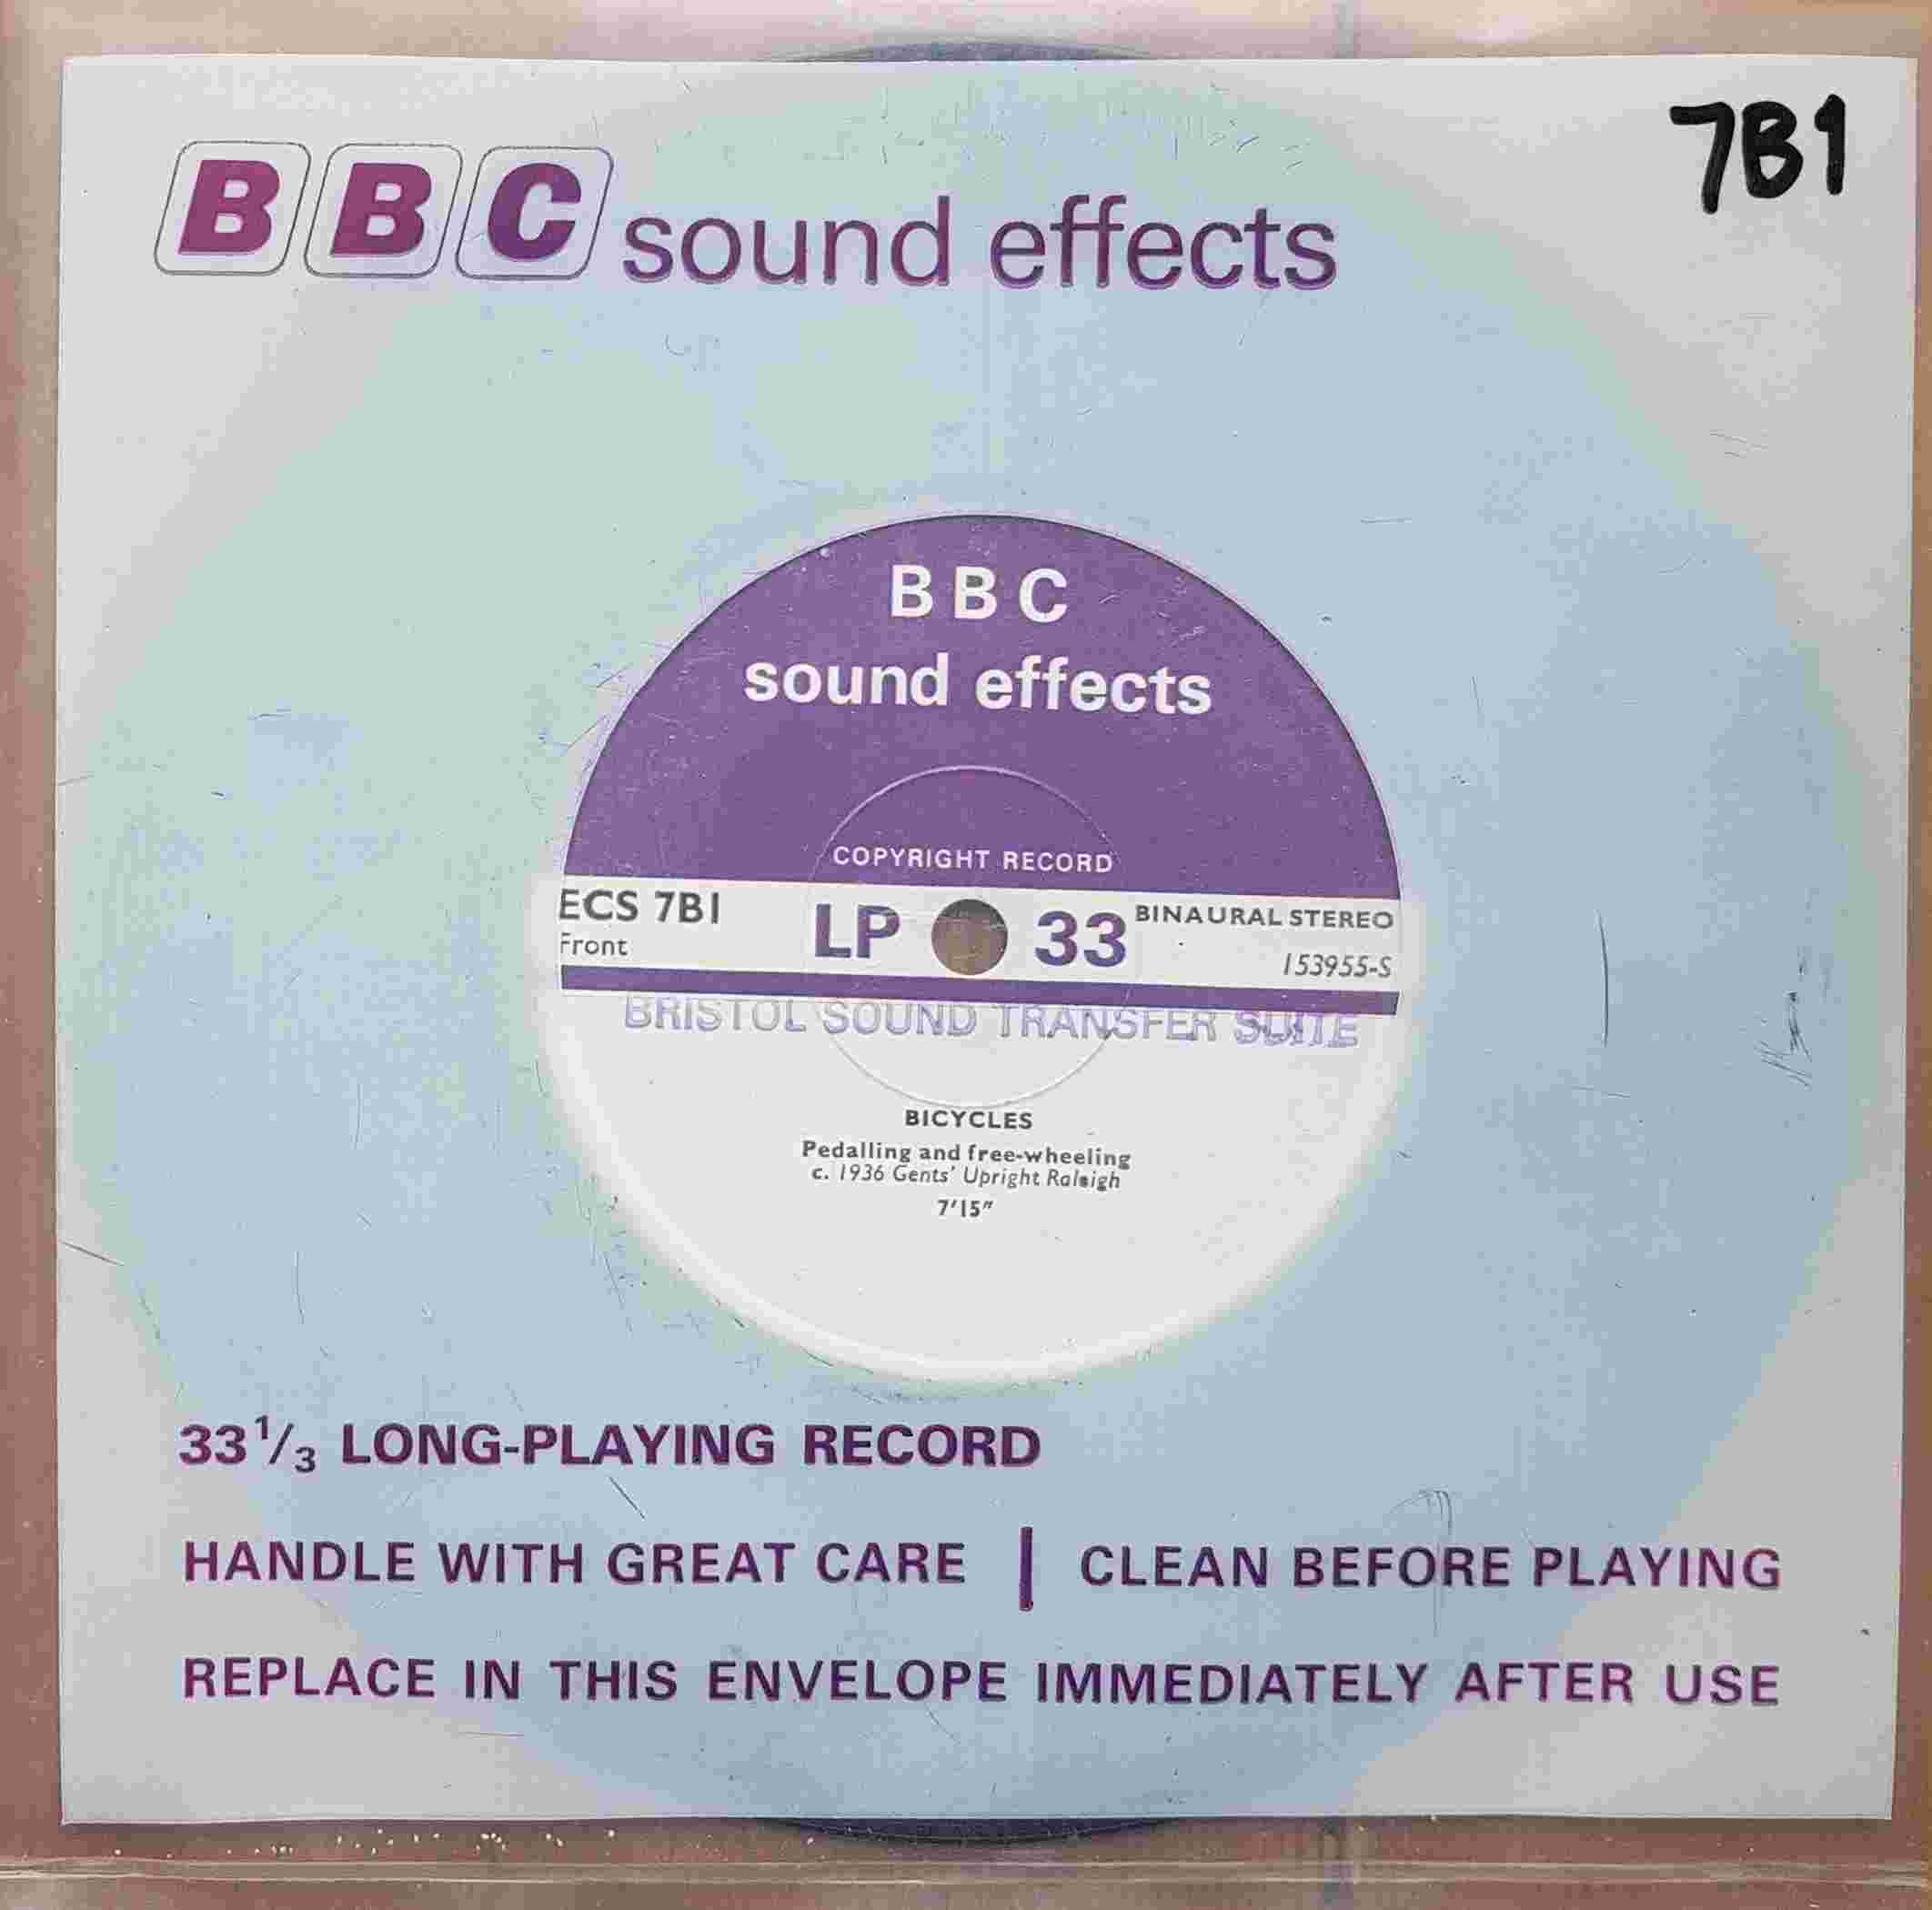 Picture of ECS 7B1 Bicycles by artist Not registered from the BBC singles - Records and Tapes library